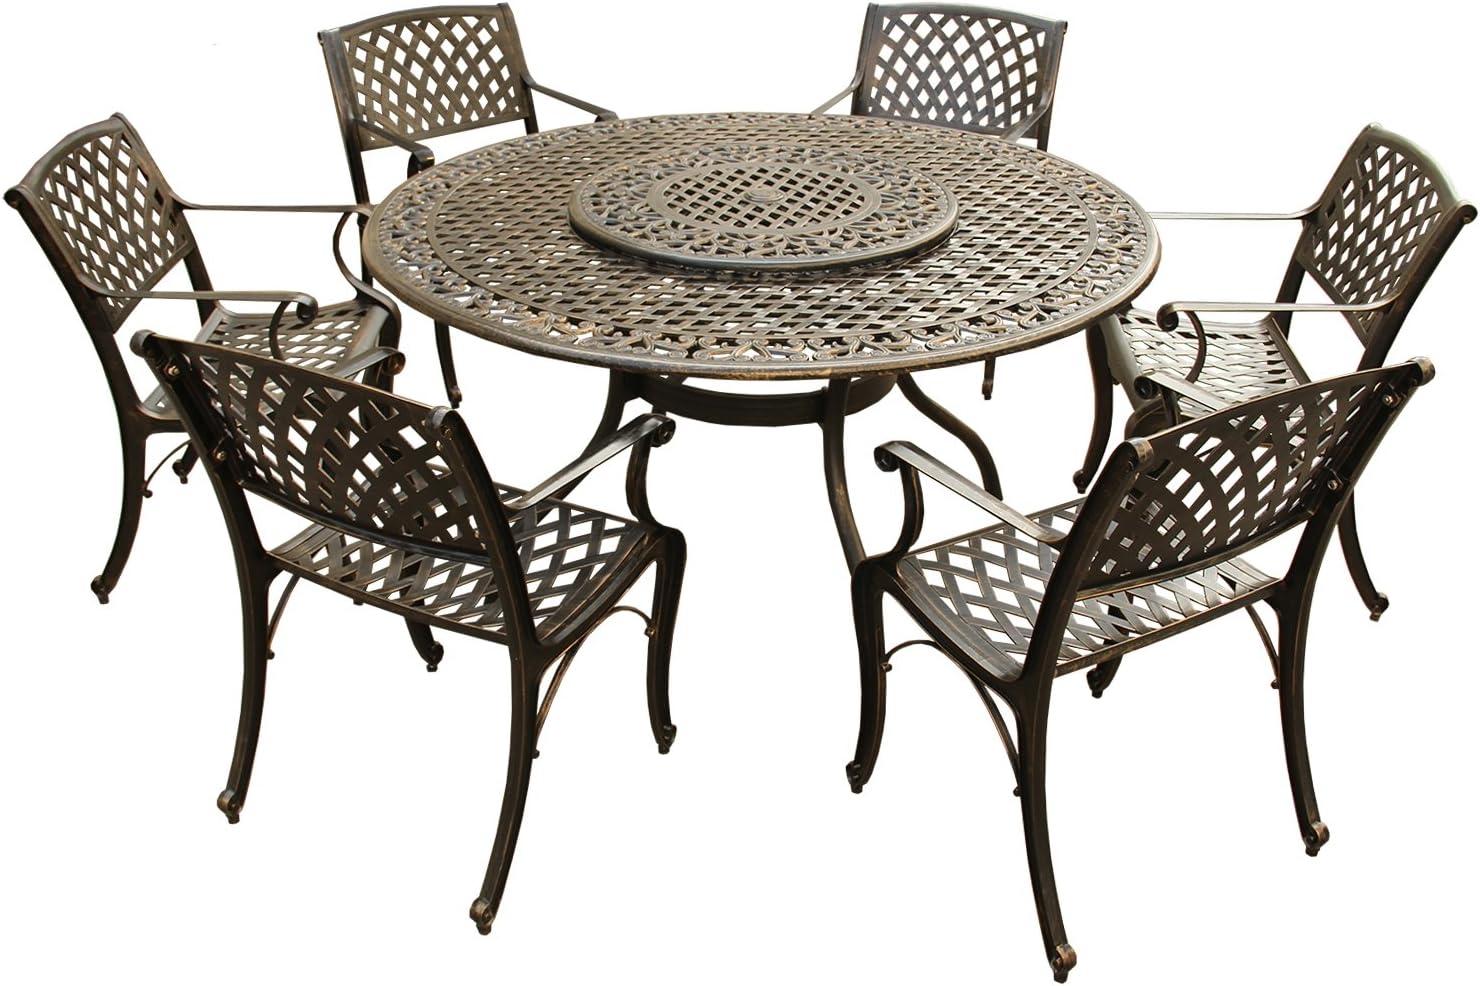 Oakland Living Ornate Traditional and Modern Contemporary Mesh Lattice 59 inch Bronze Round Lazy Susan and Six Chairs Outdoor Aluminum Patio Dining Set